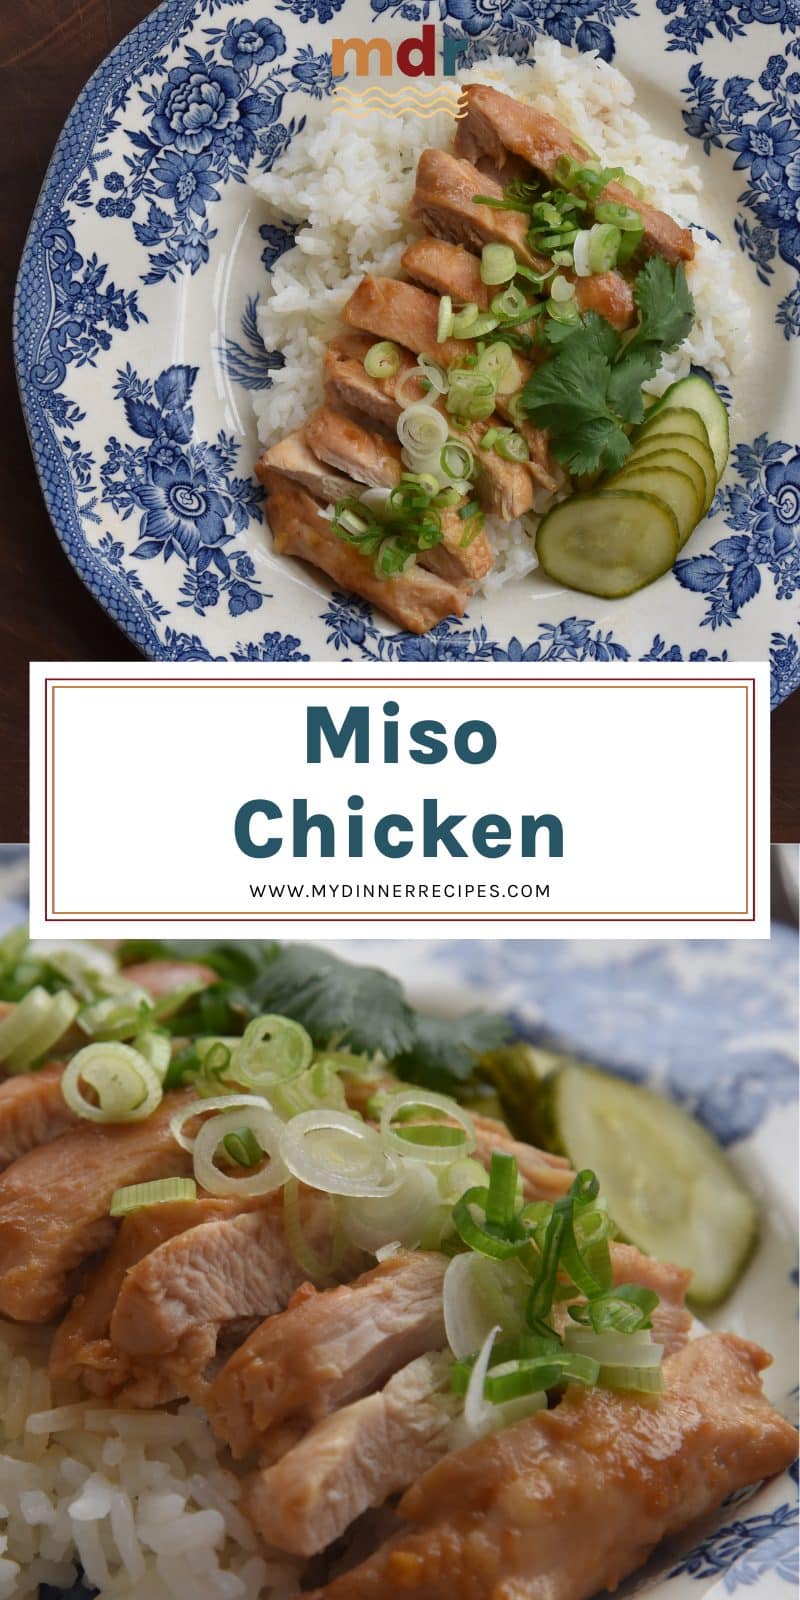 plate of miso chicken with scallions, cilantro, pickles over a bed of rice.